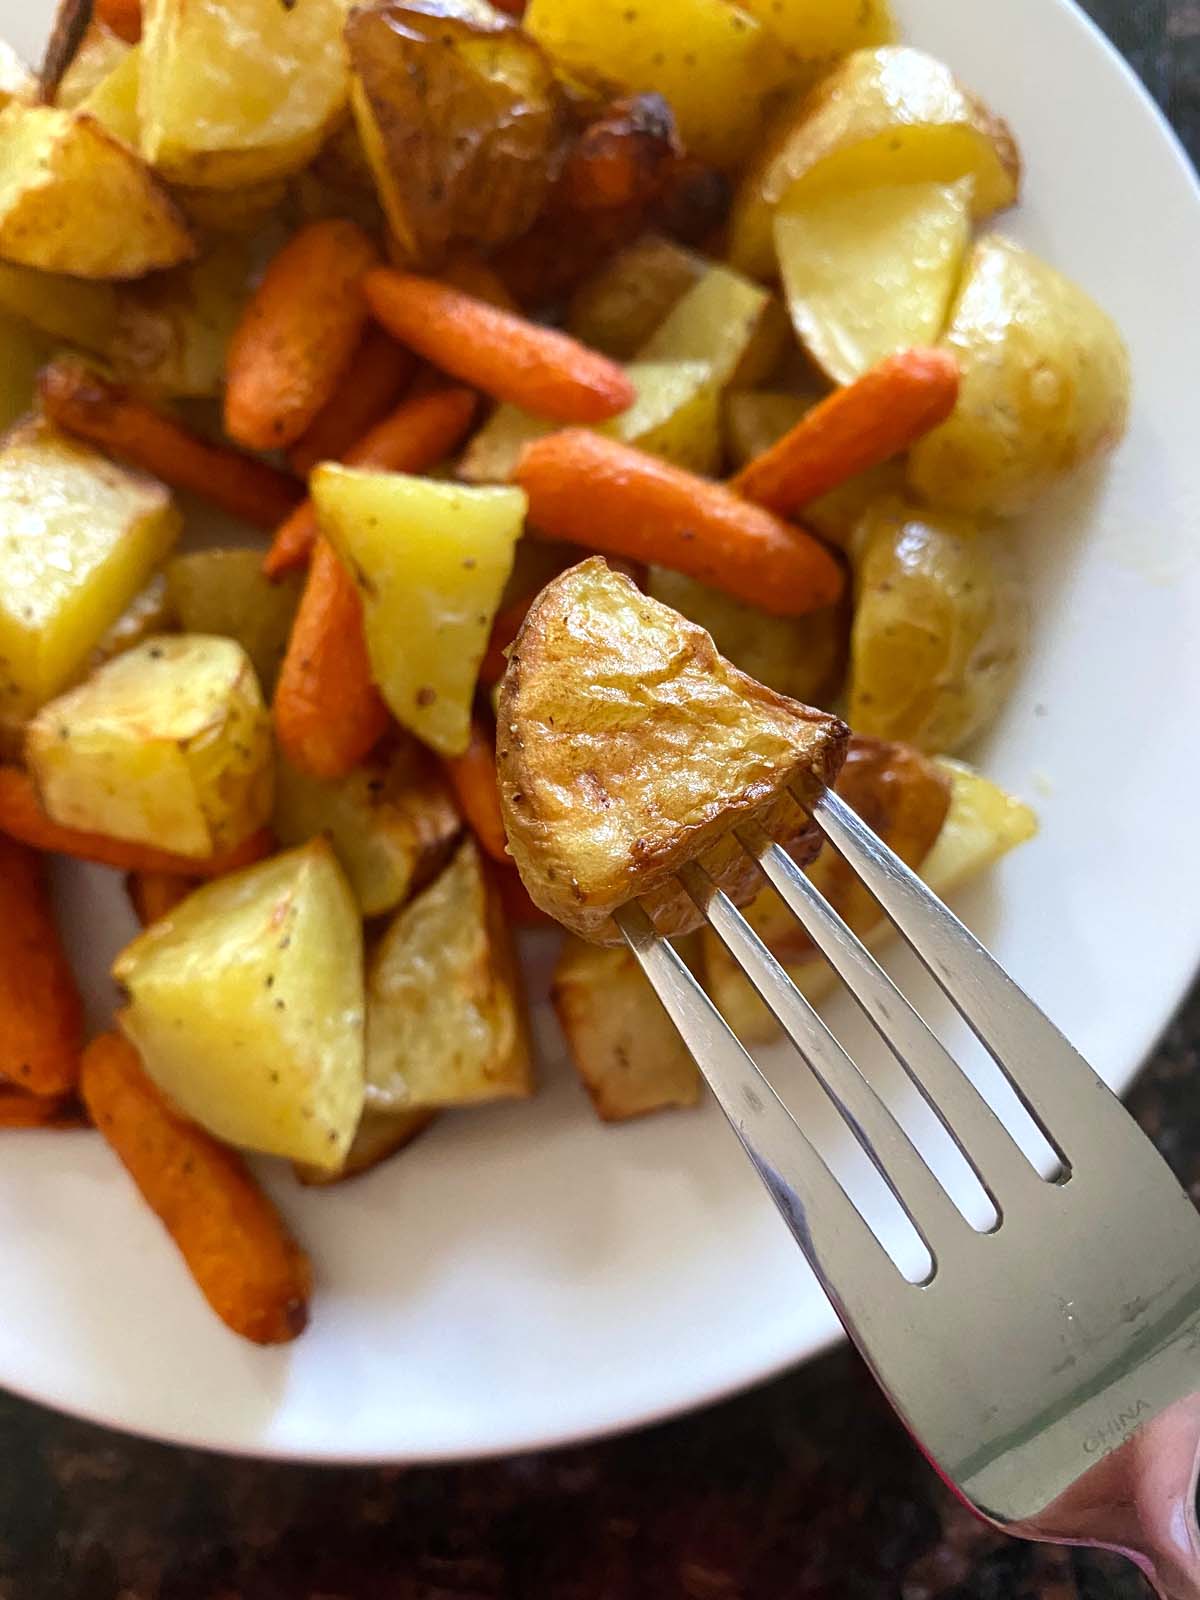 Roasted potatoes and carrots on a white plate.